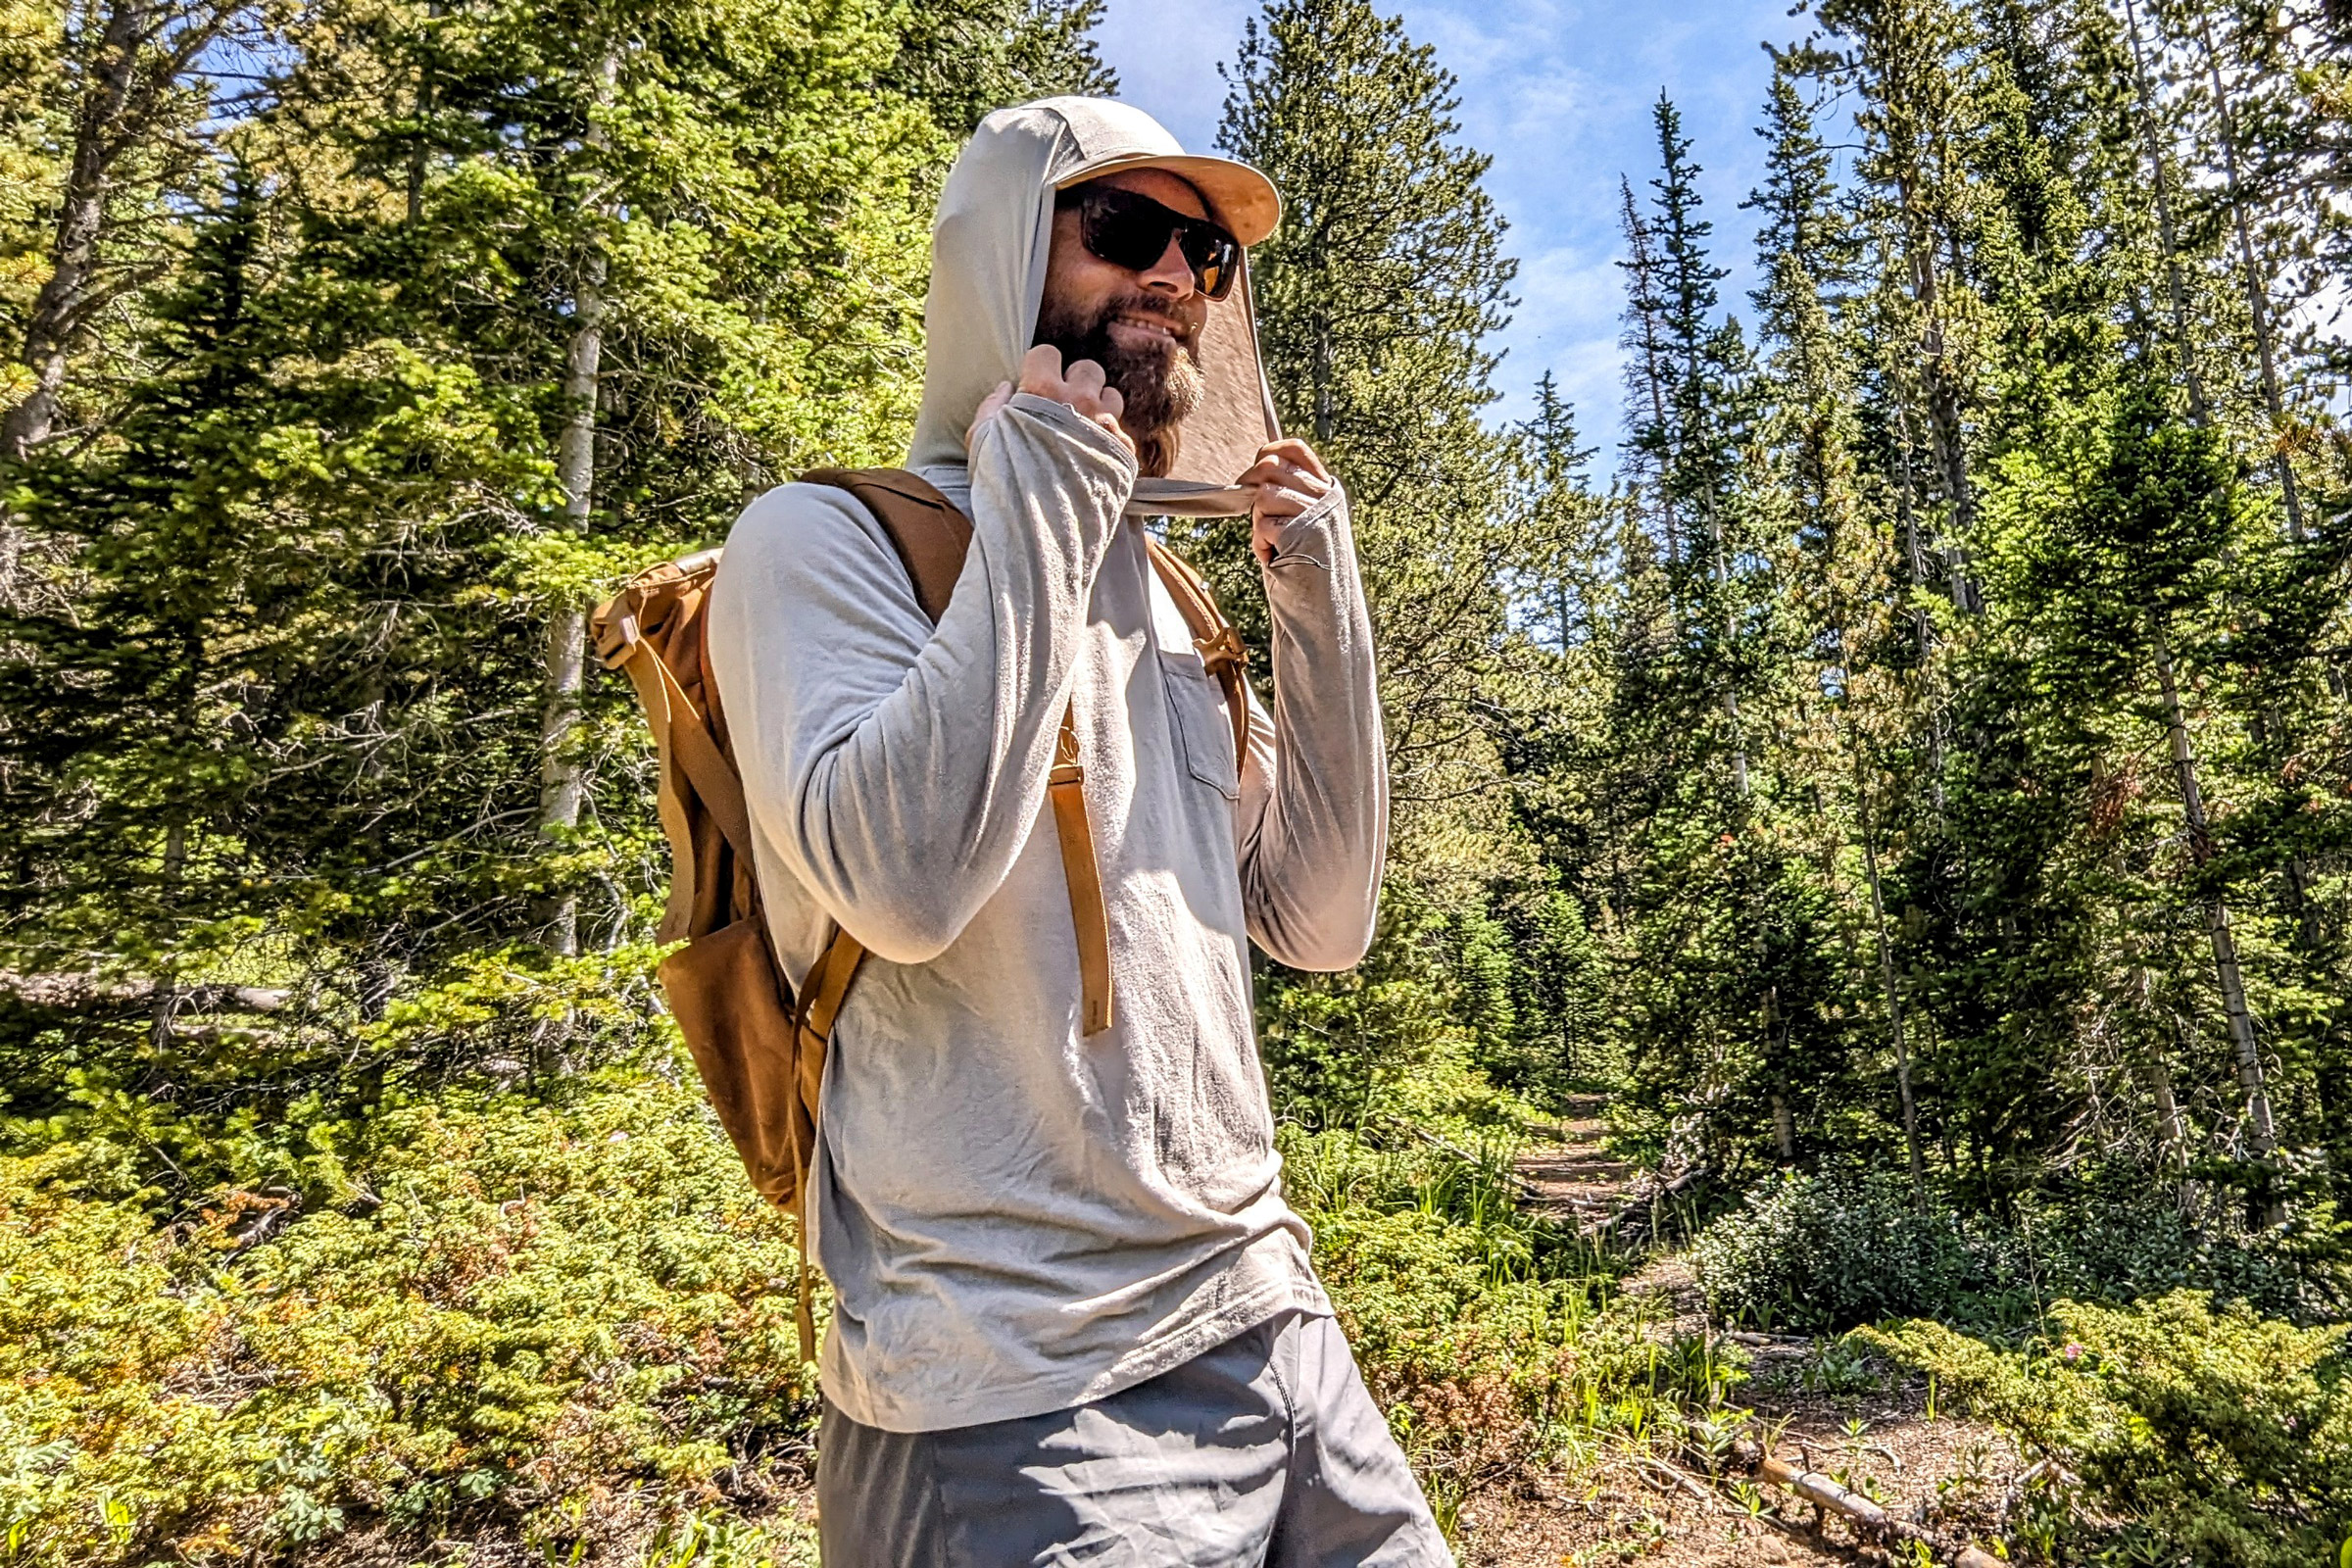 I Wore This Layer Every Day for 2 Months: Free Fly Bamboo Sun Hoodie Review